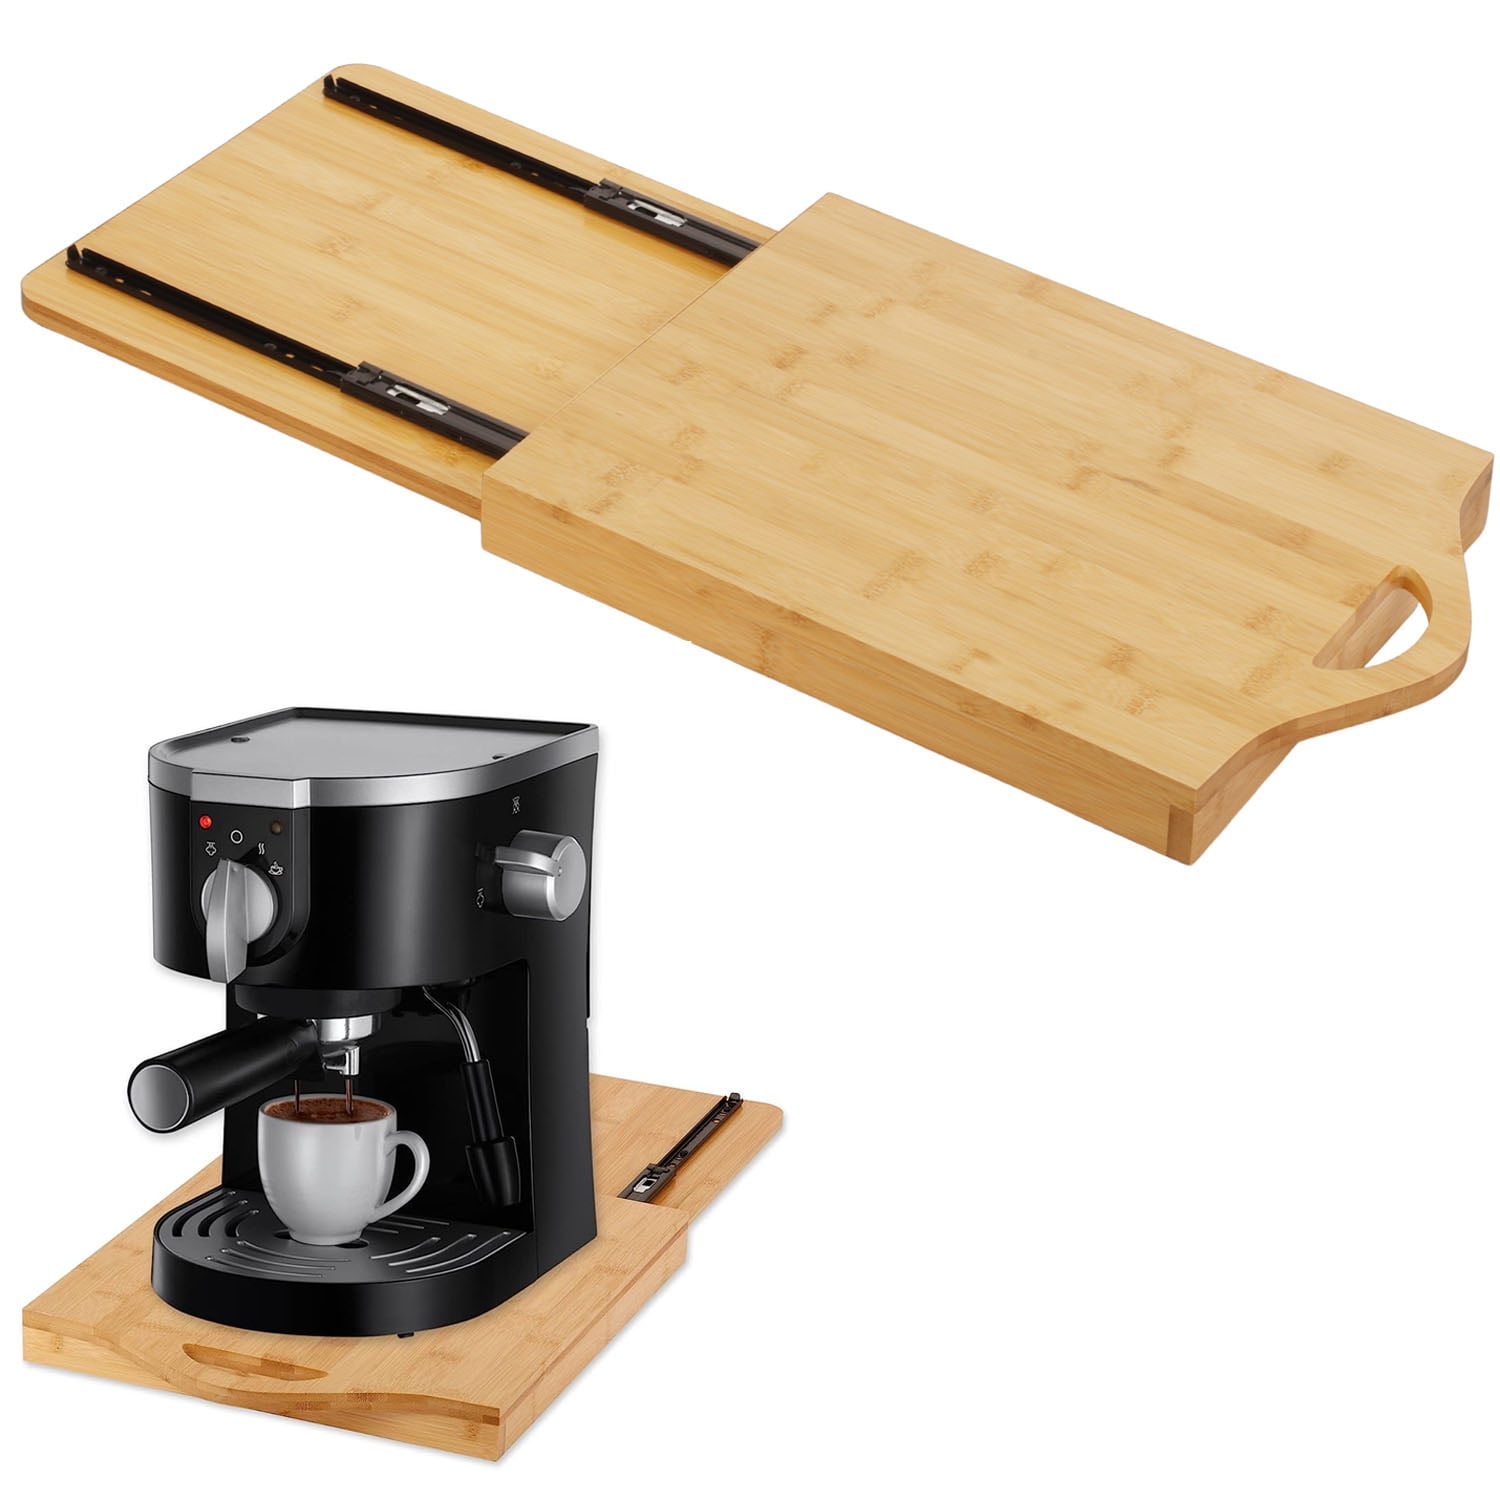 Tonchean Kitchen Bamboo Sliding Tray Rolling Appliance Slider 26 inch Countertop Organizer for Coffee Maker and More, Gifts, Size: 26.3L x 13W x 1.5H